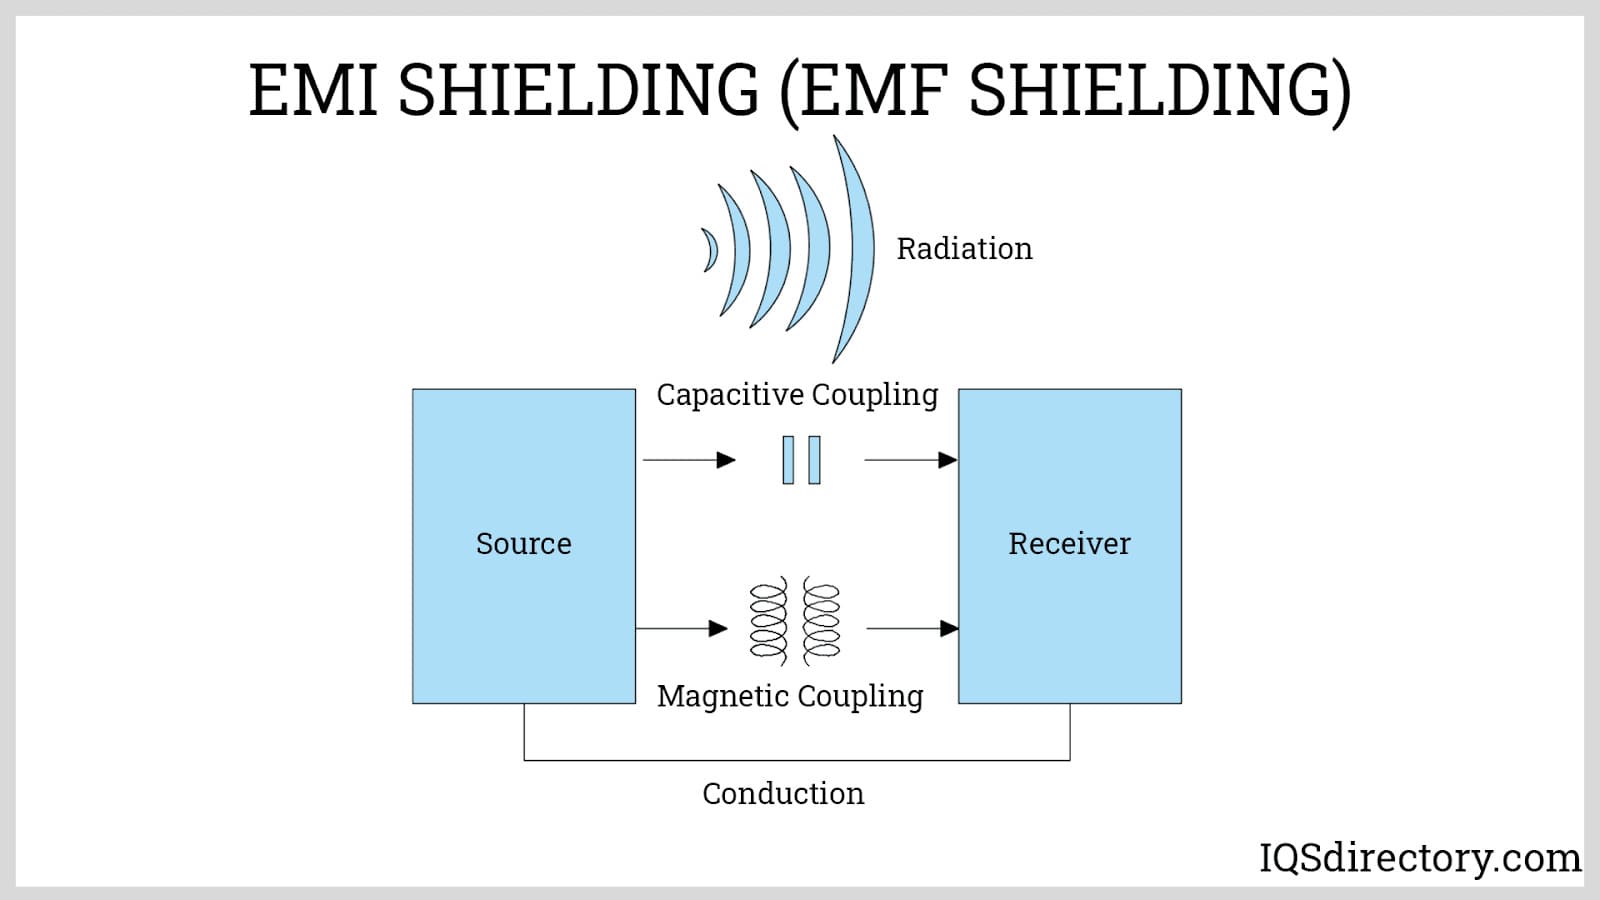 RF Shielding: Types, Uses, Features and Benefits